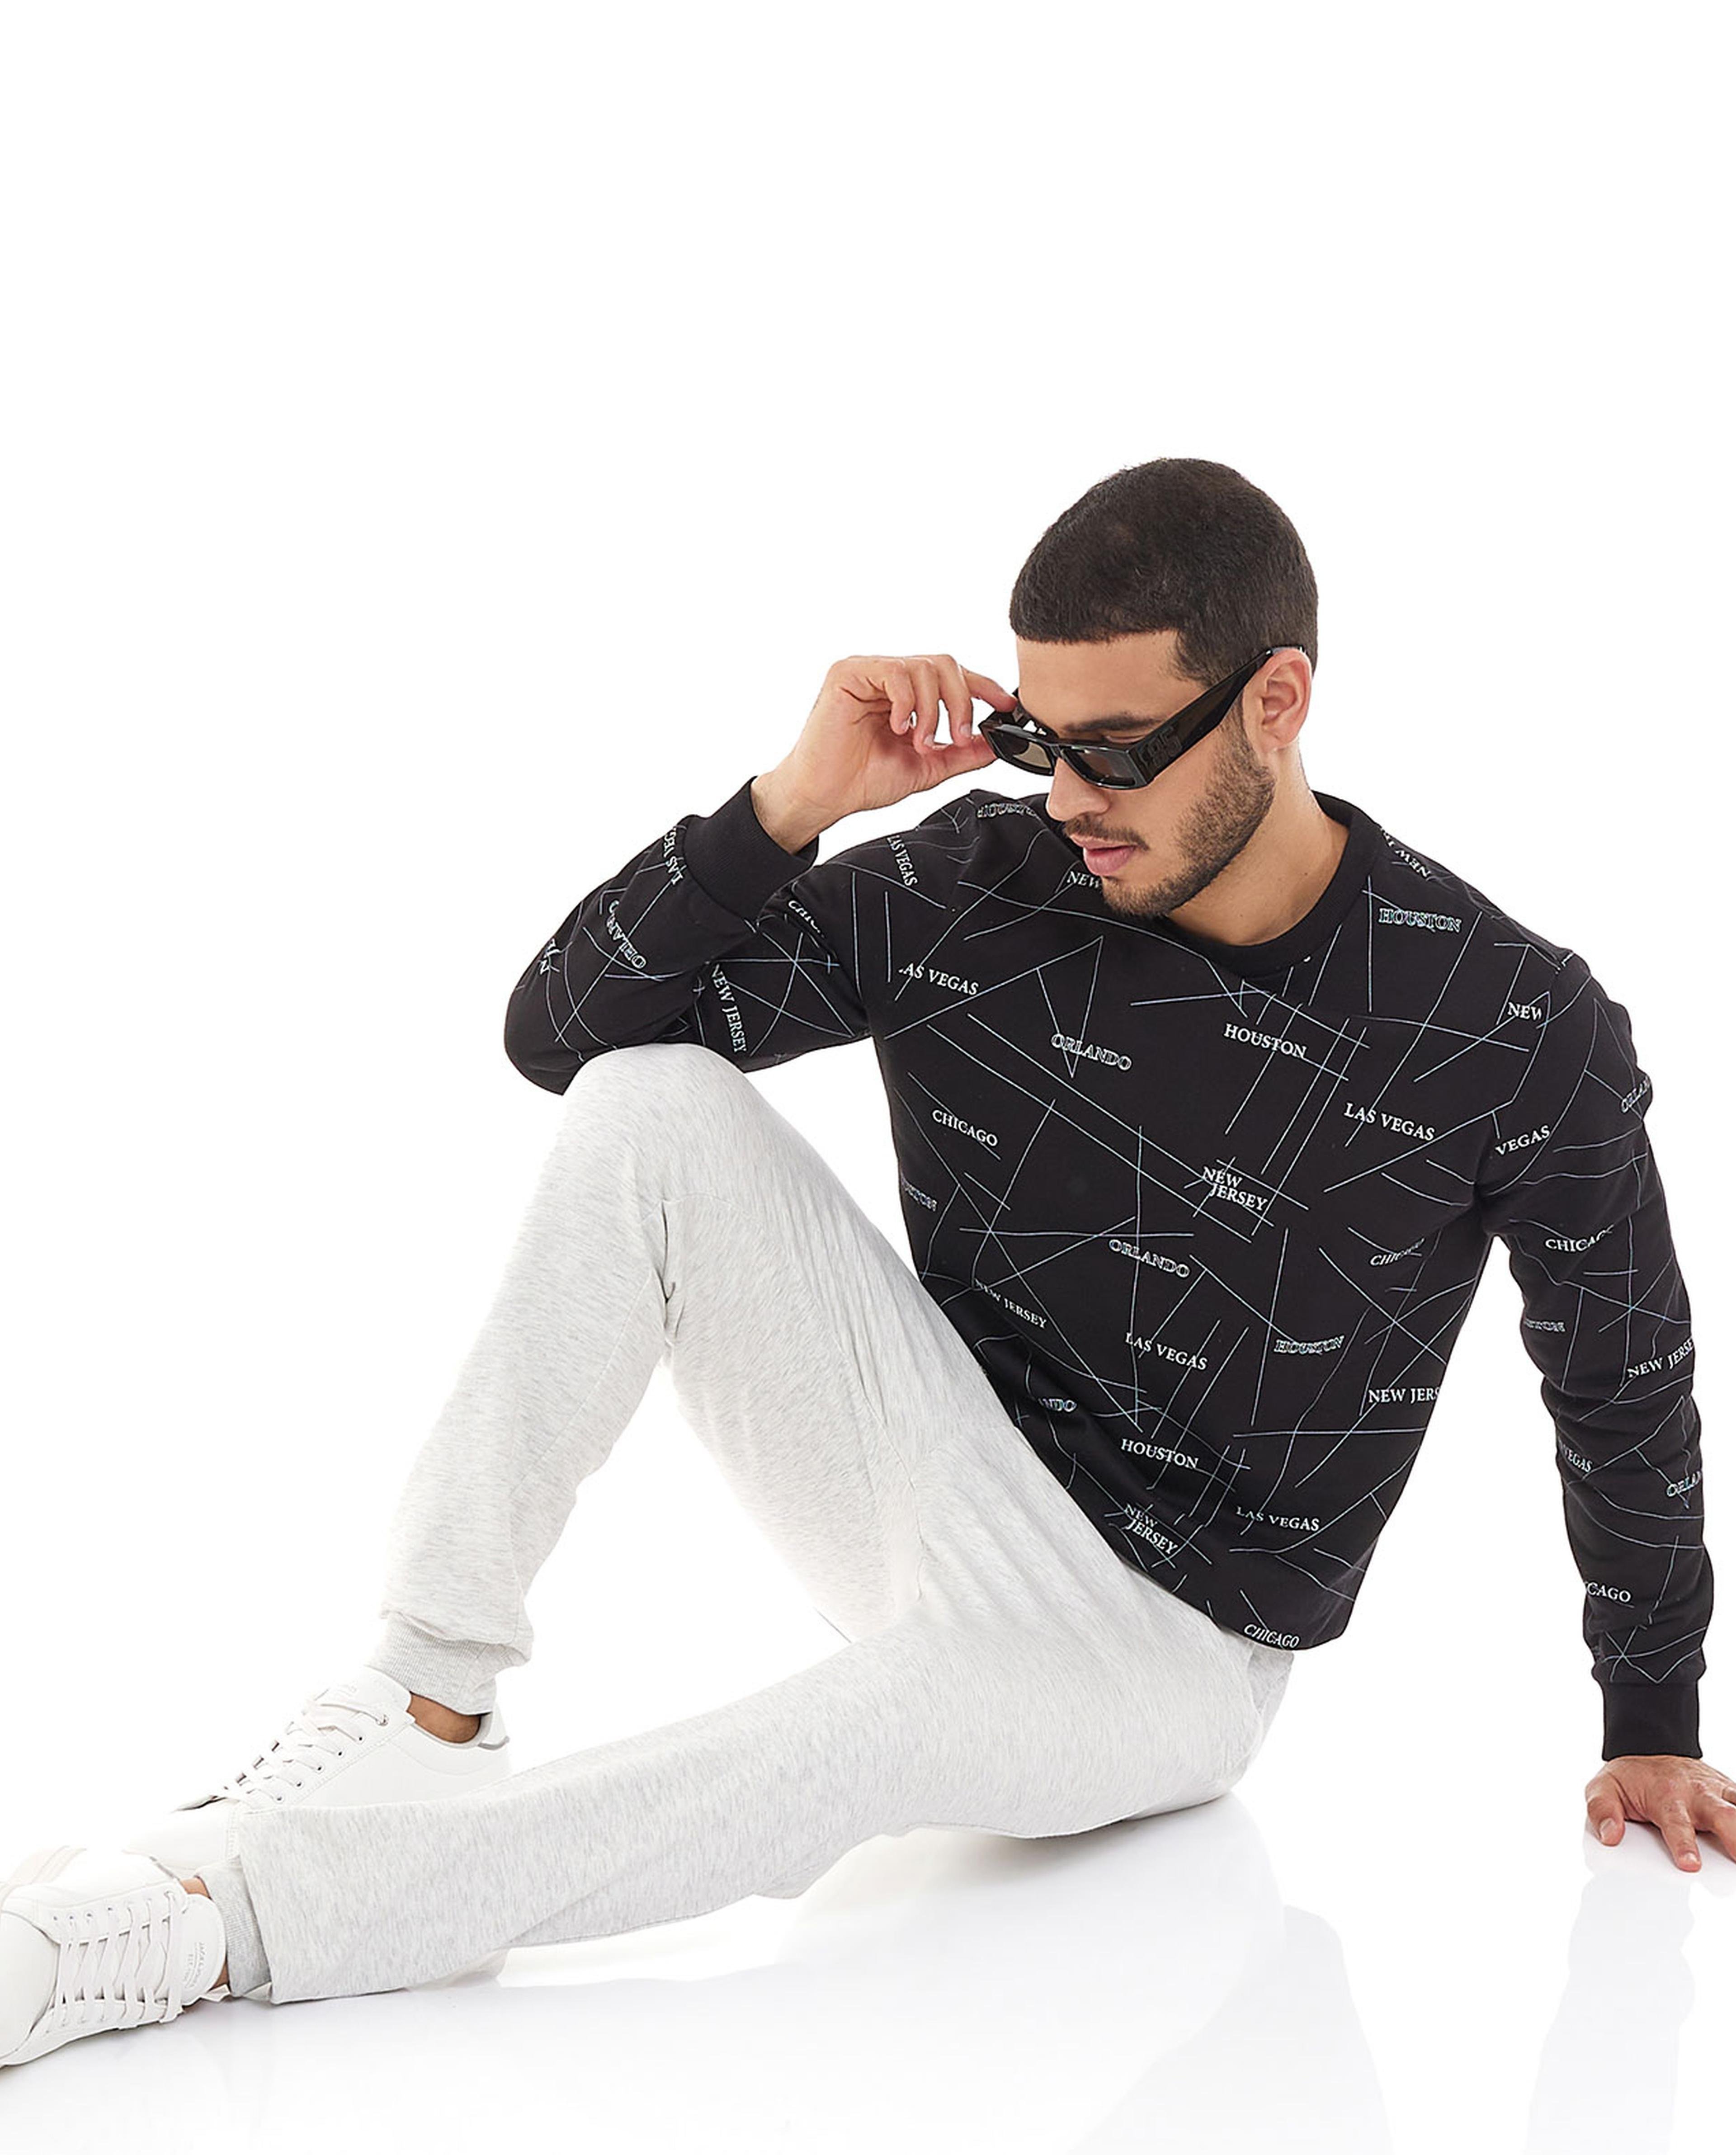 All Over Print Sweatshirt with Crew Neck and Long Sleeves